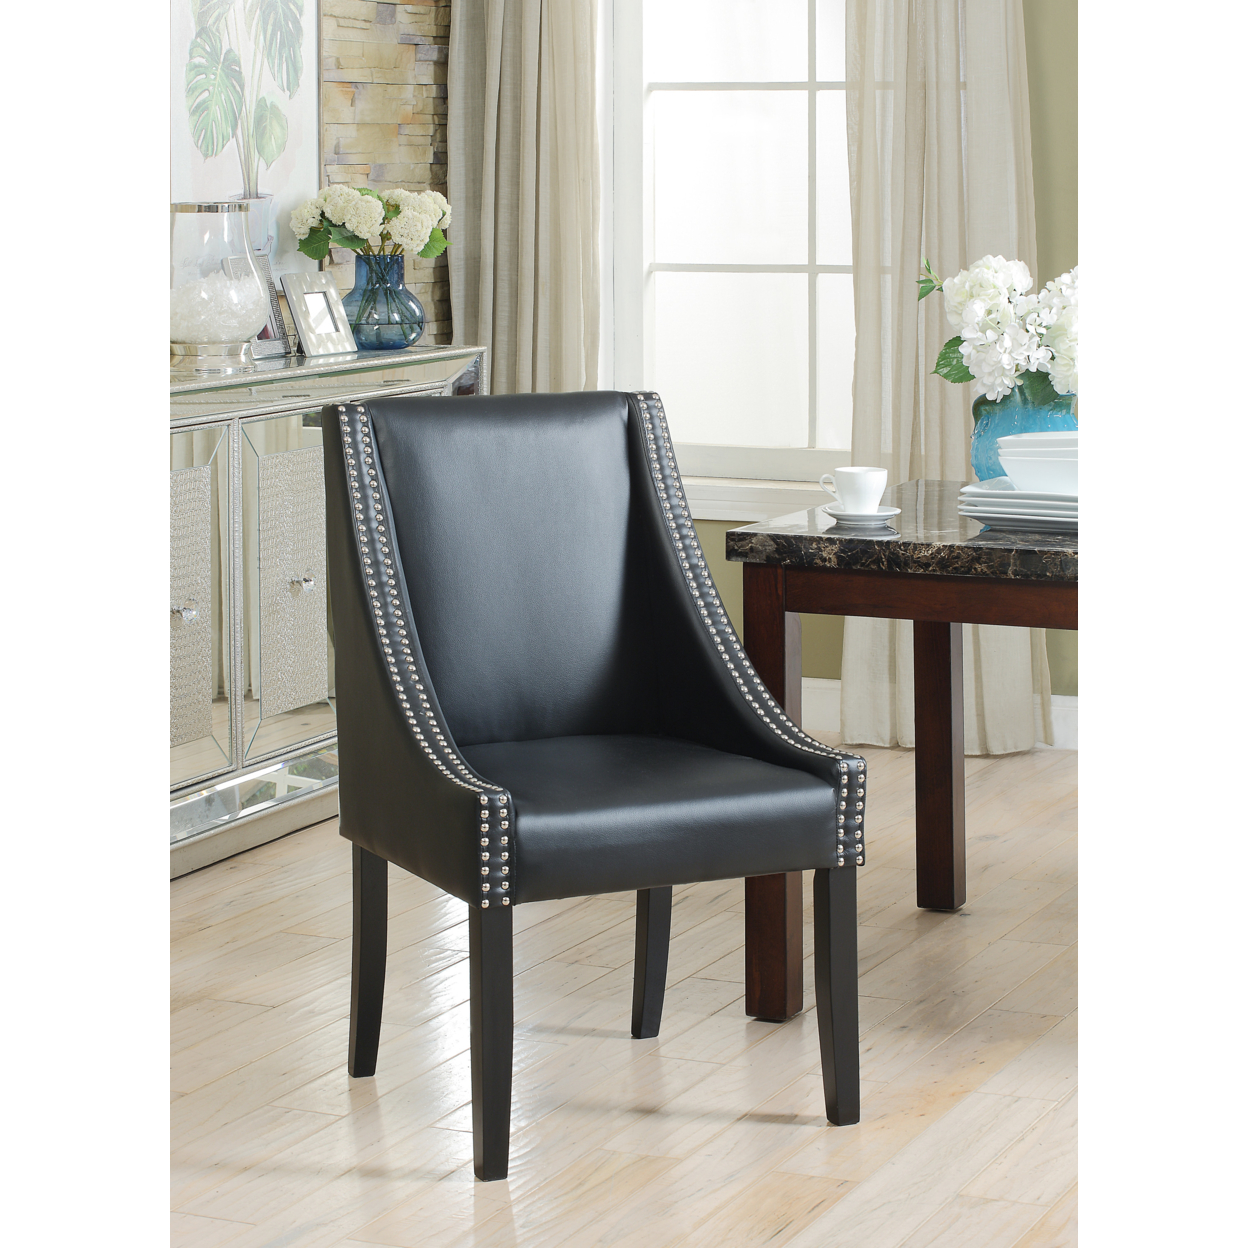 Jefferson Dining Side Accent Chair Pebble Grain PU Leather Espresso Wood Frame, Set Of 2 - Black